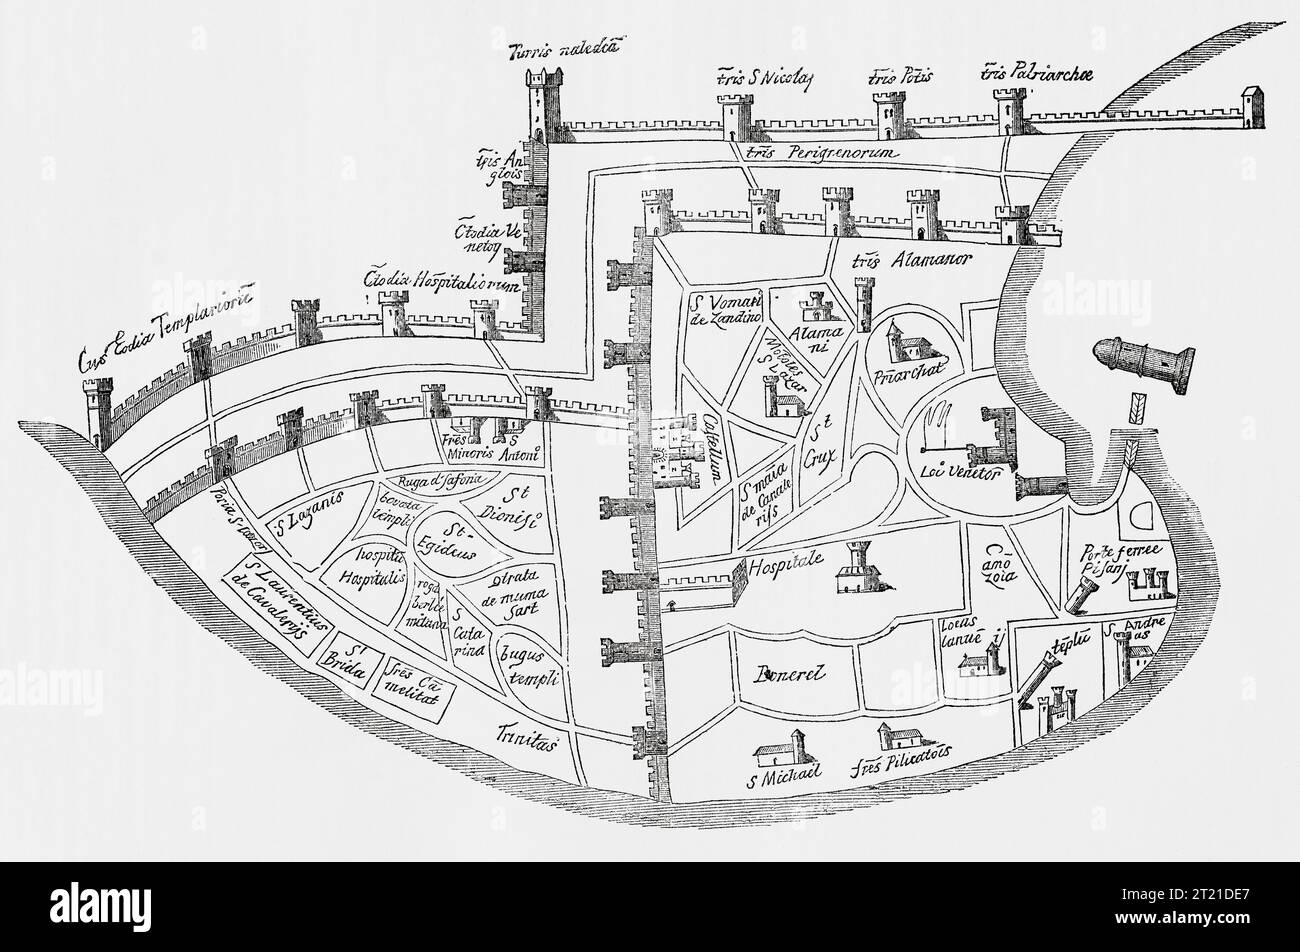 Plan of the town of Acre, Israel, in the 14th century, from a drawing by Martino Sanuto in the 21st volume of the Archaeologia.  From Cassell's Illustrated History of England, published 1857. Stock Photo